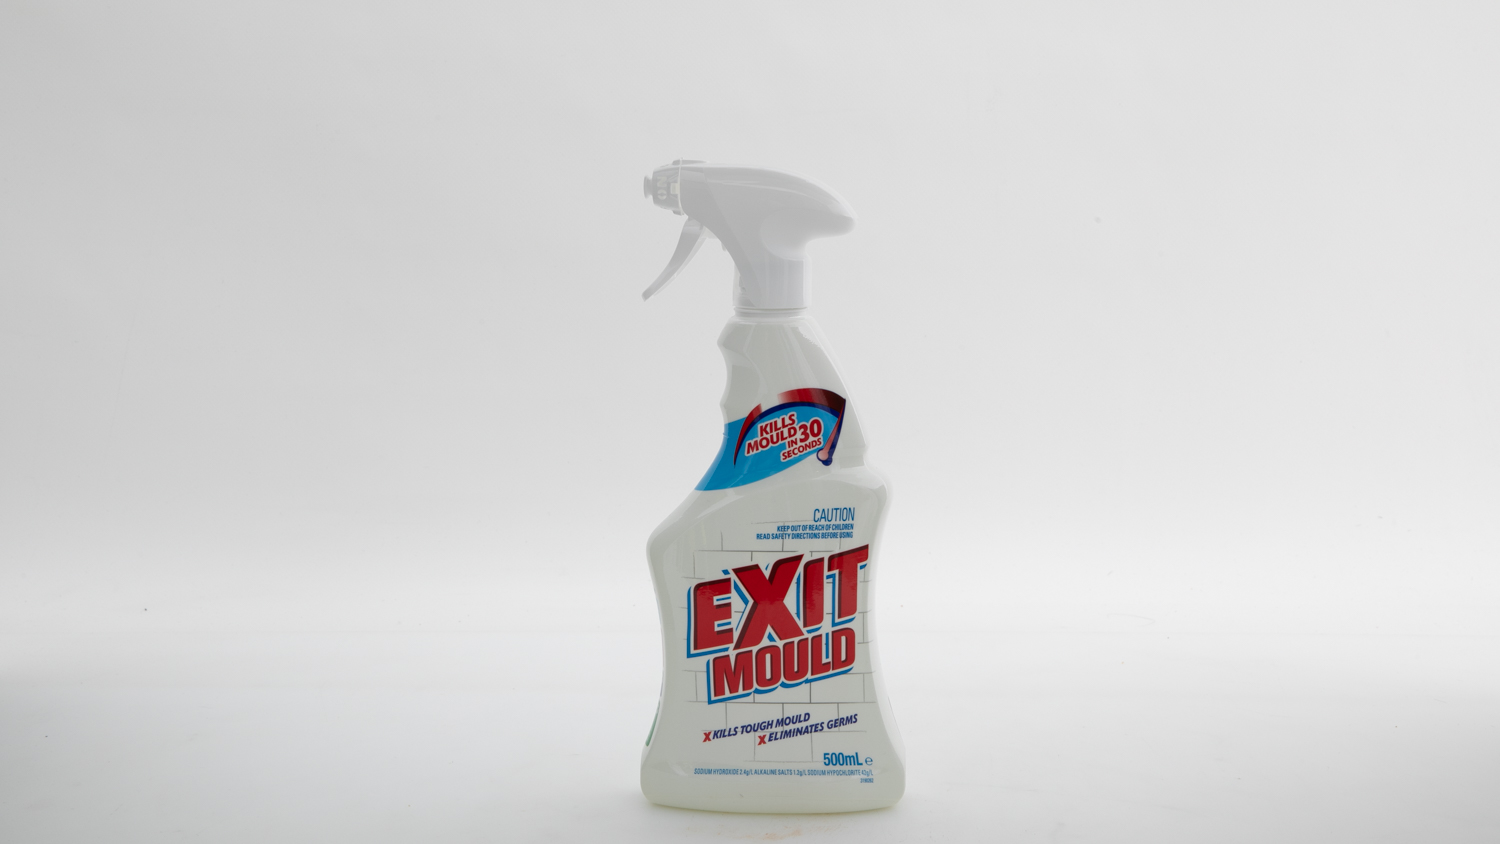 Exit Mould Bathroom cleaner carousel image